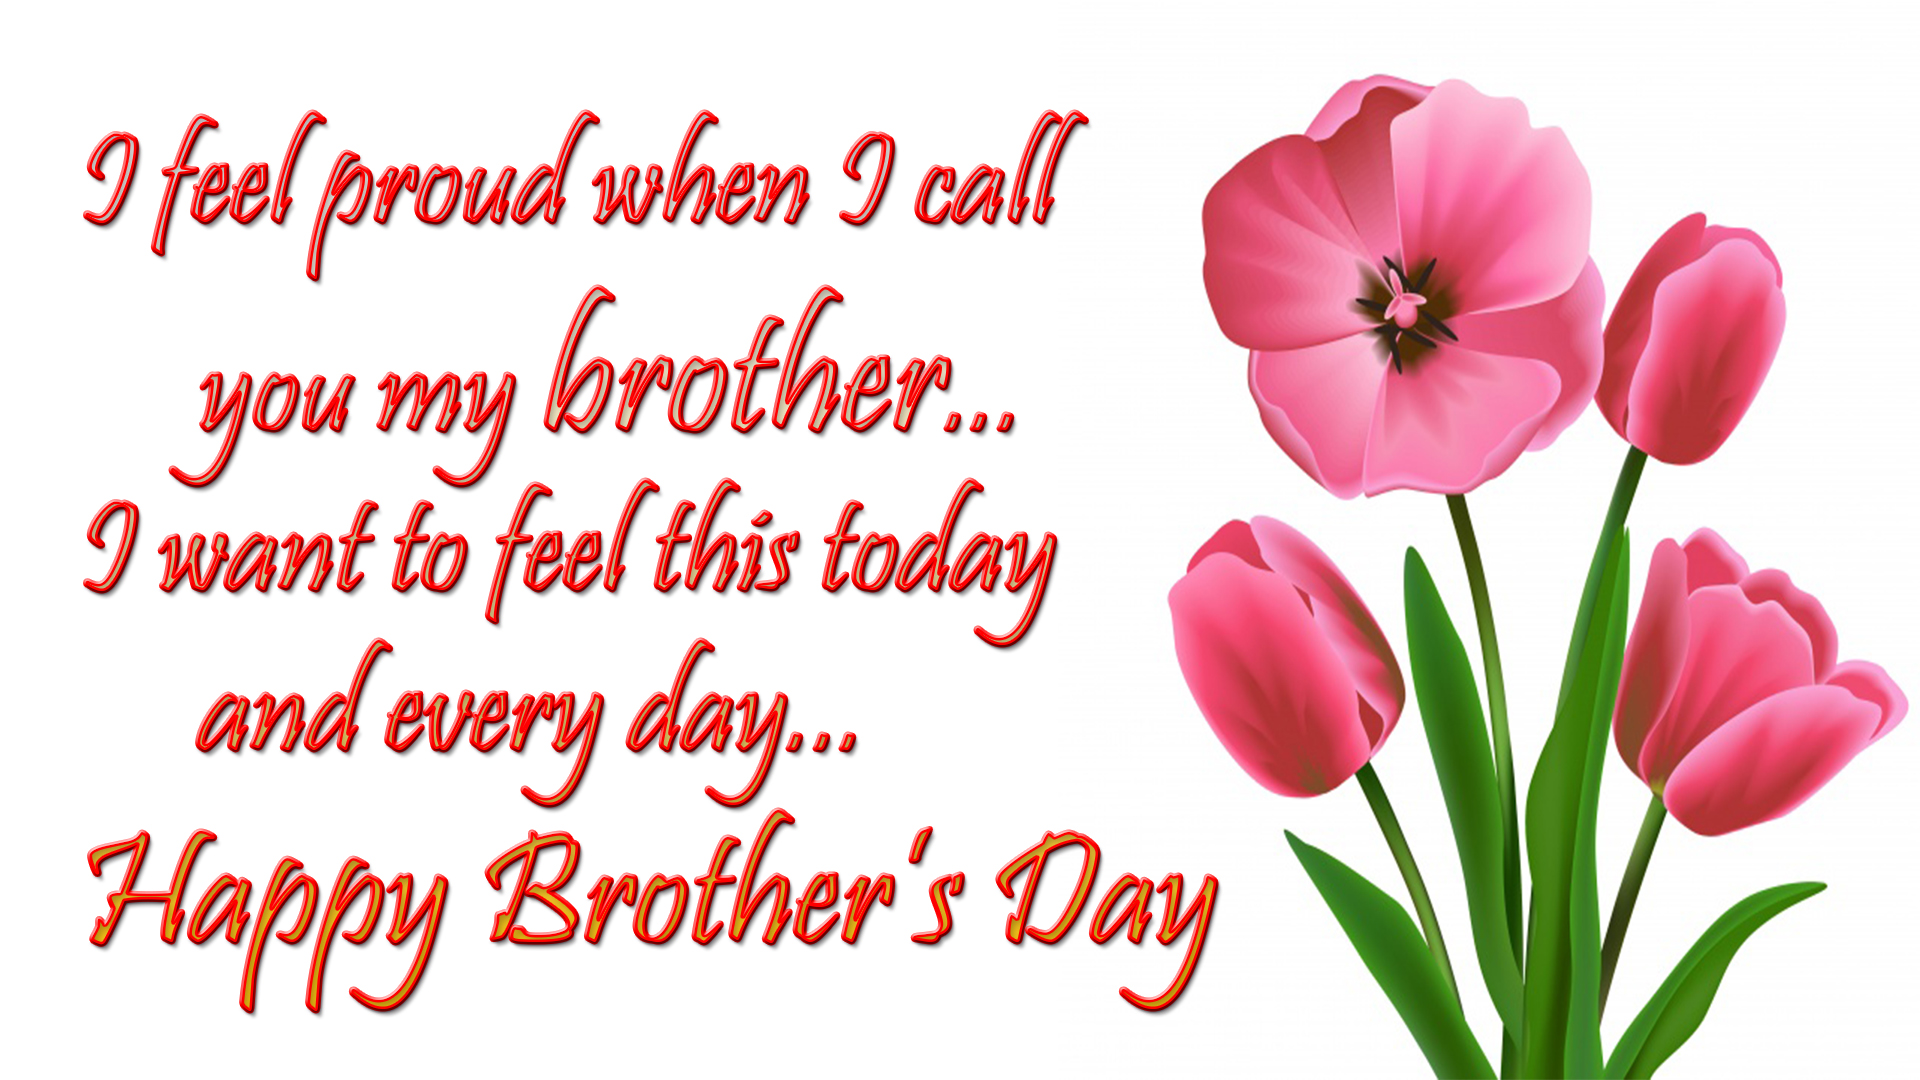 brother's day wishes 2018